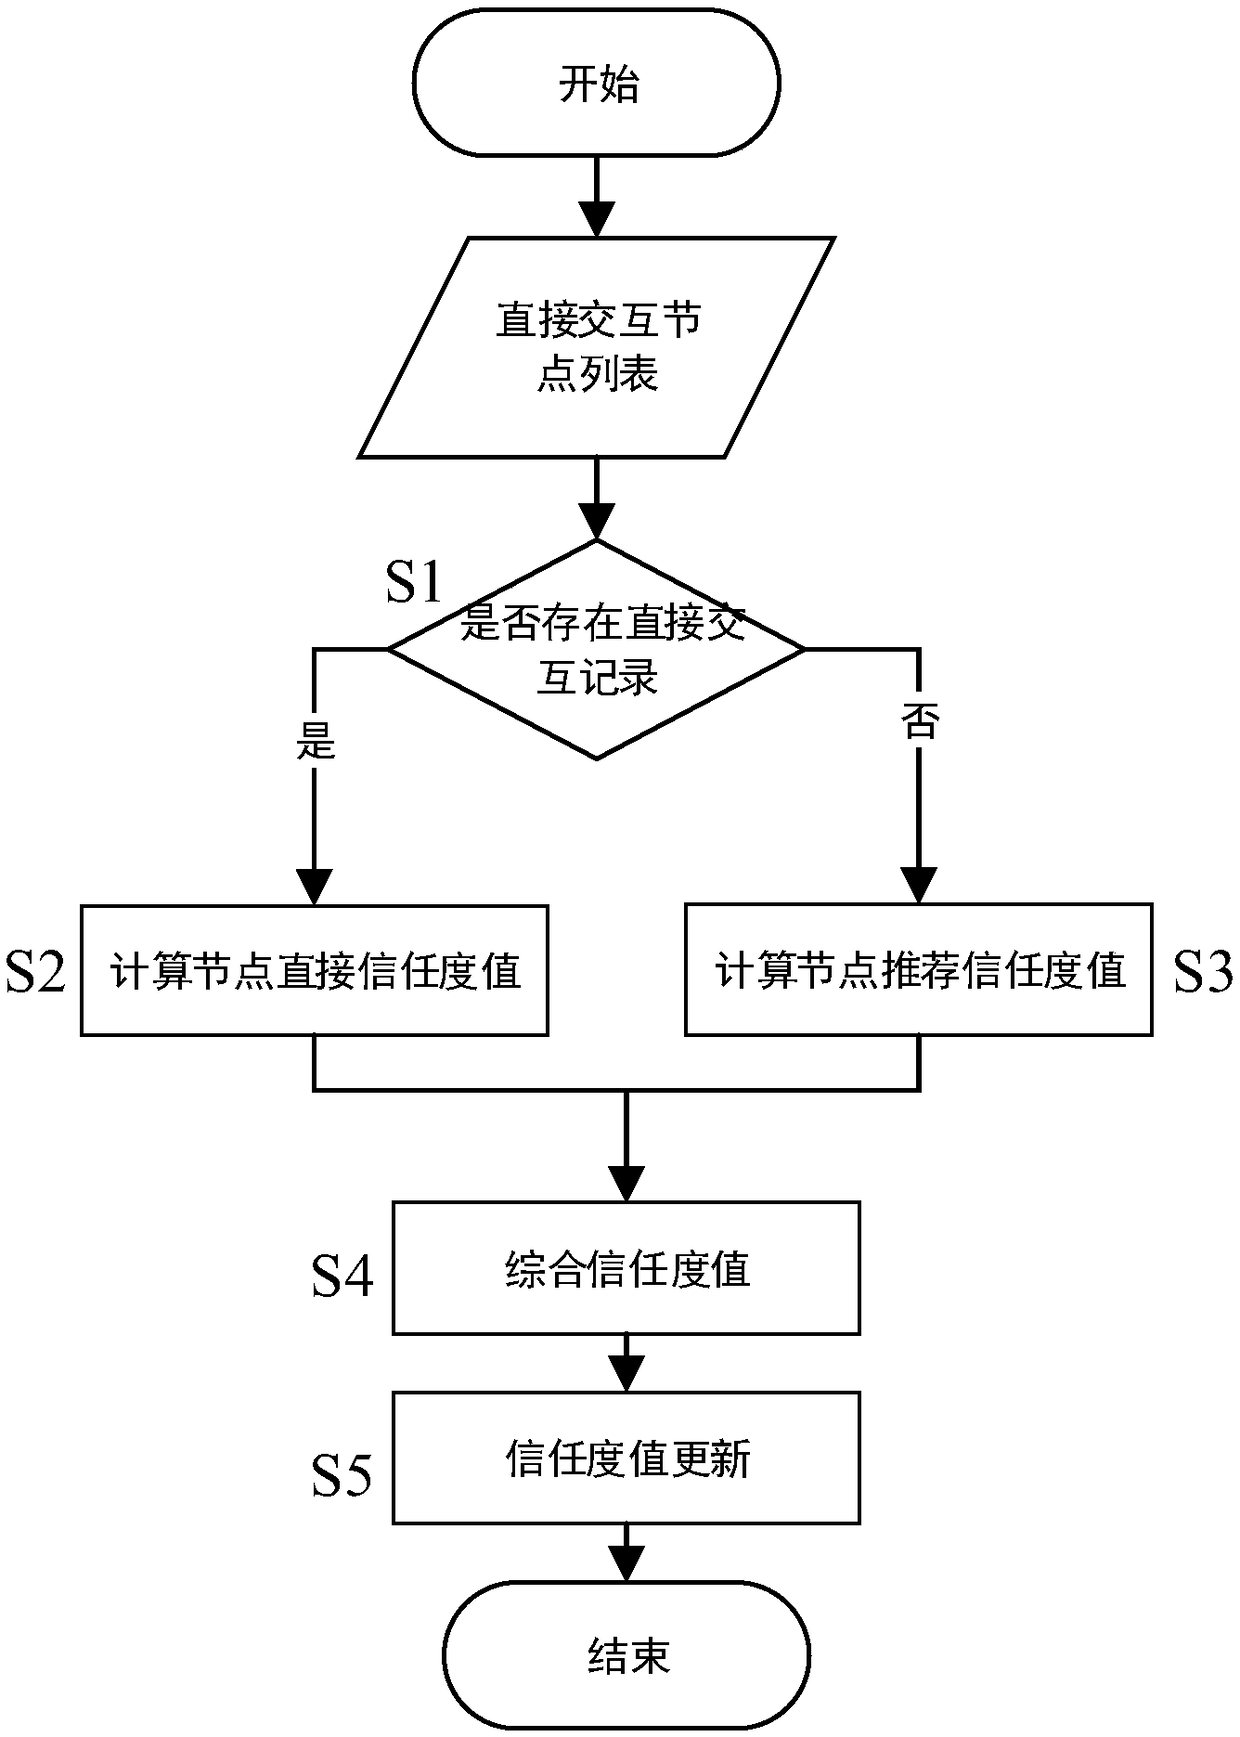 Method for evaluating trust degree of Internet of things node